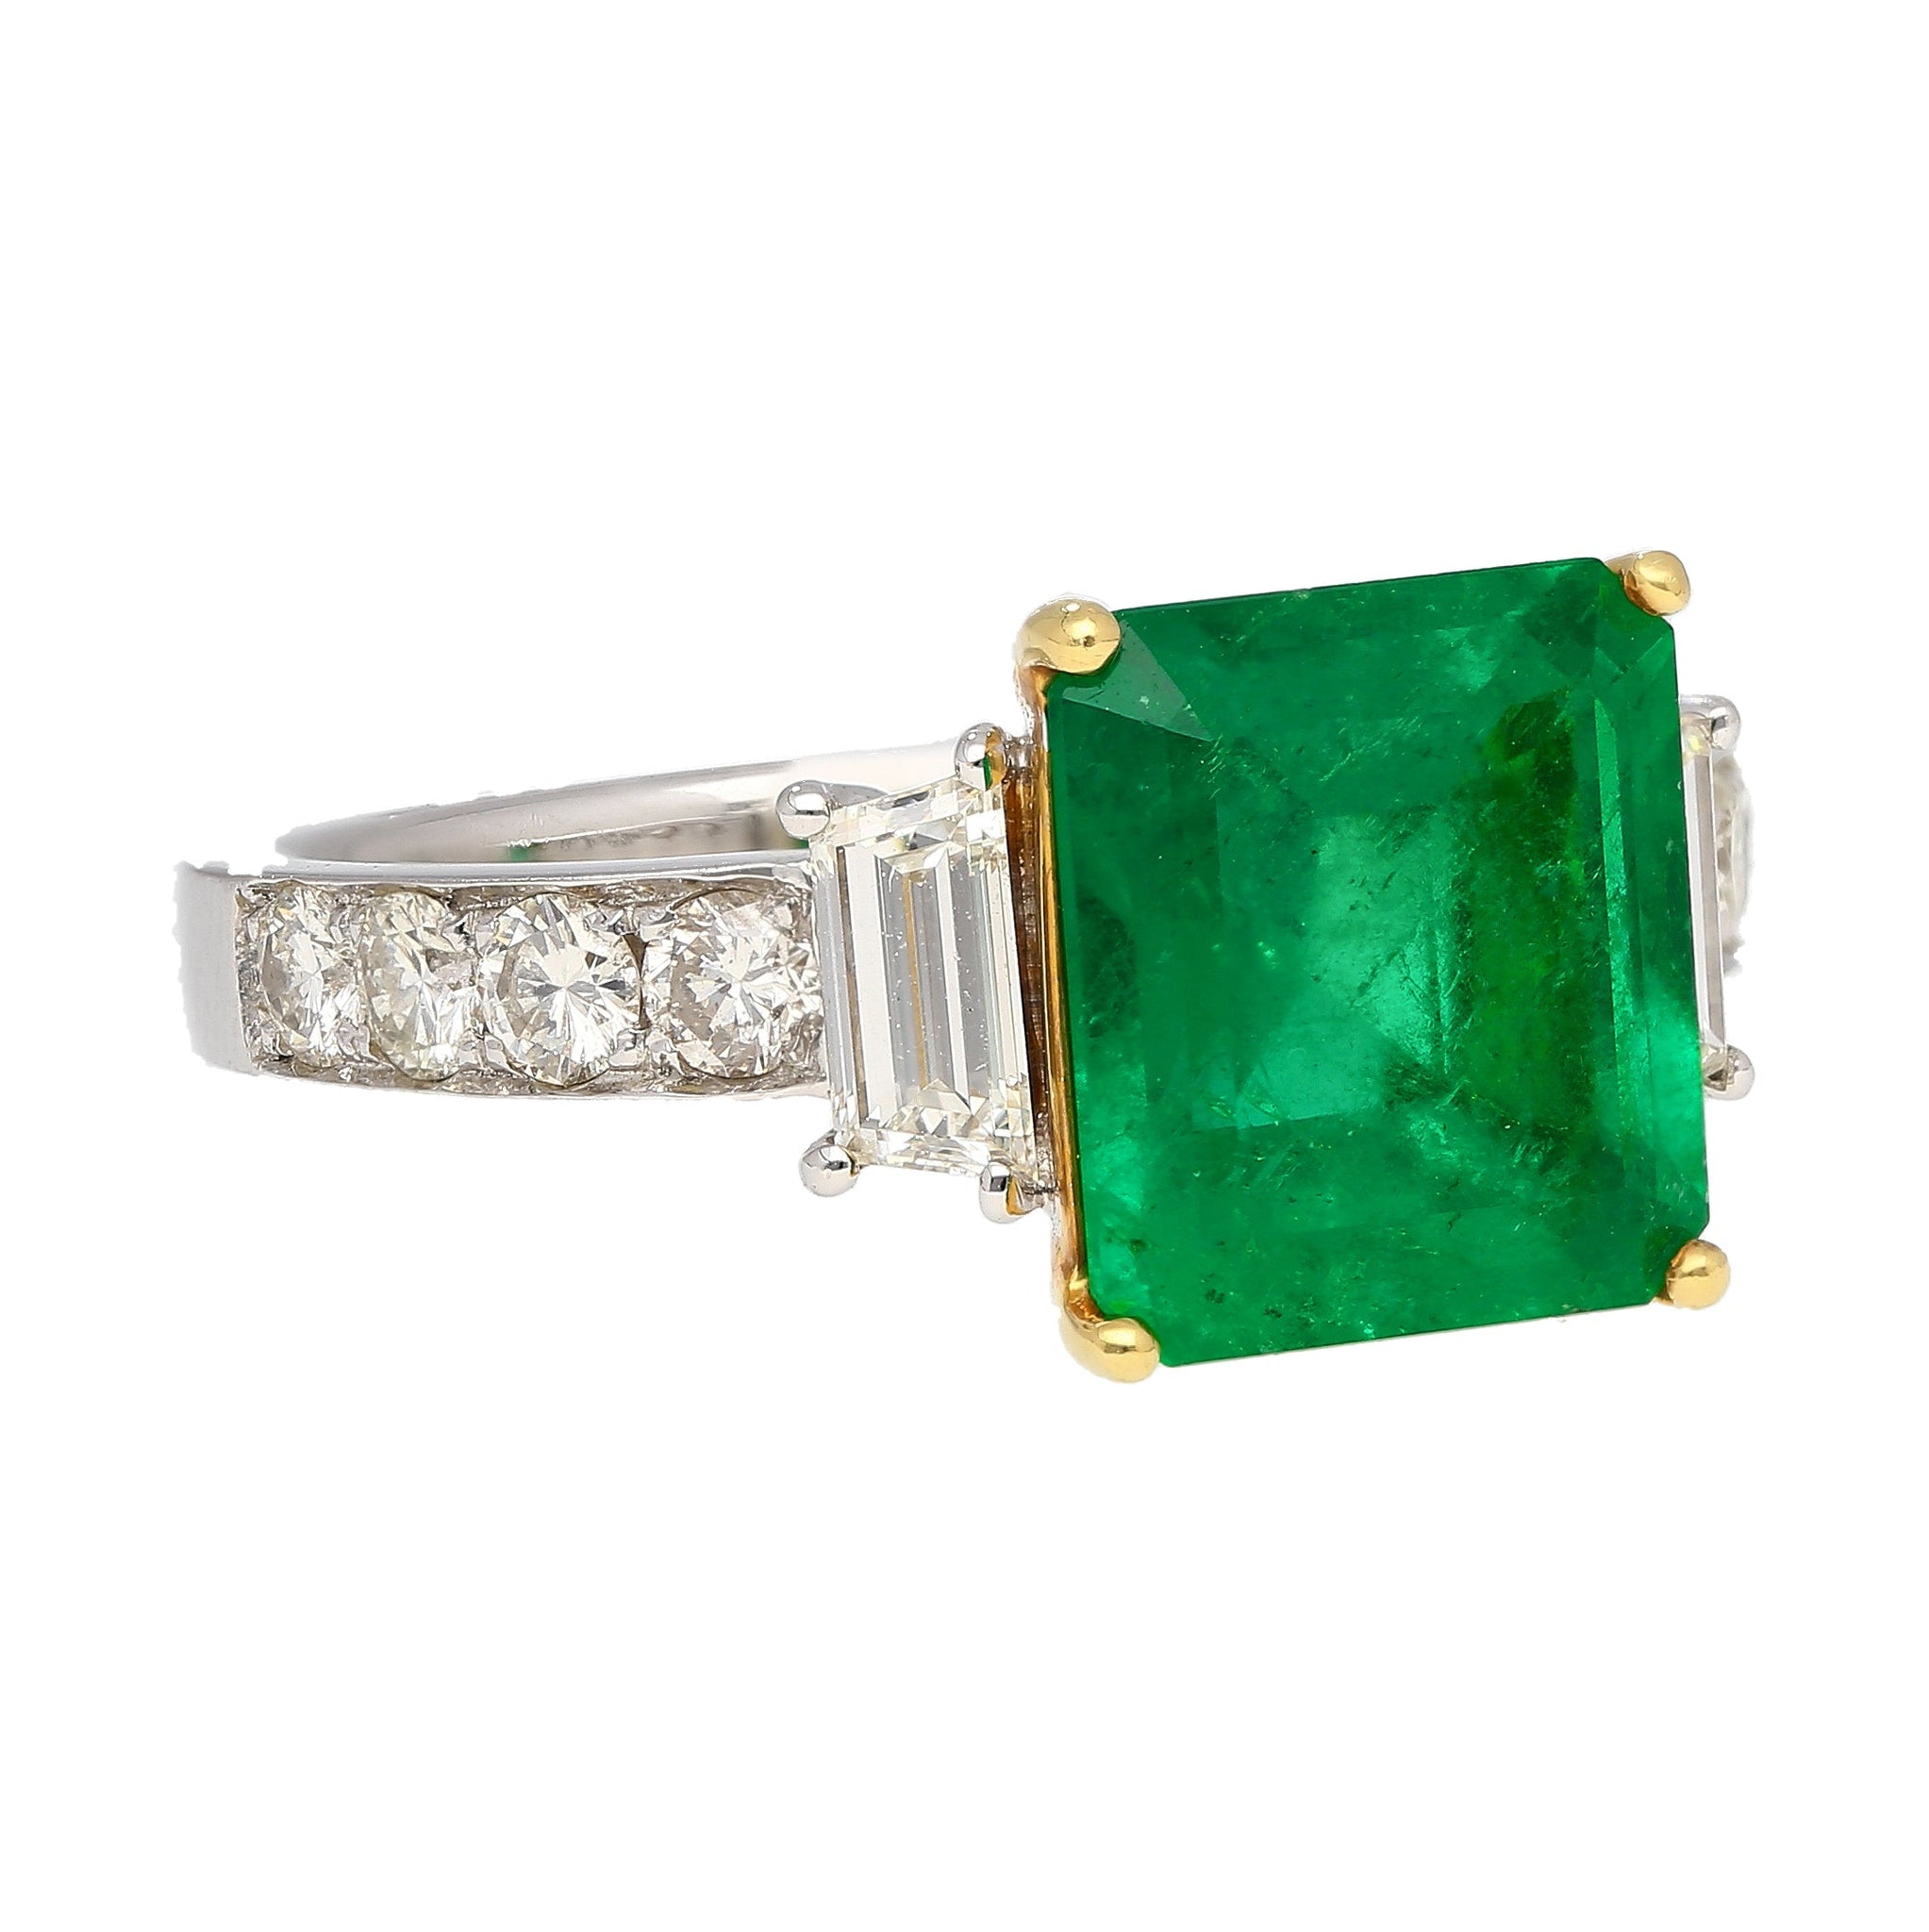 GRS Certified 3.16 Carat Vivid Green Minor Oil Colombia Emerald and Diamond 18K Ring | GRS Appendix.